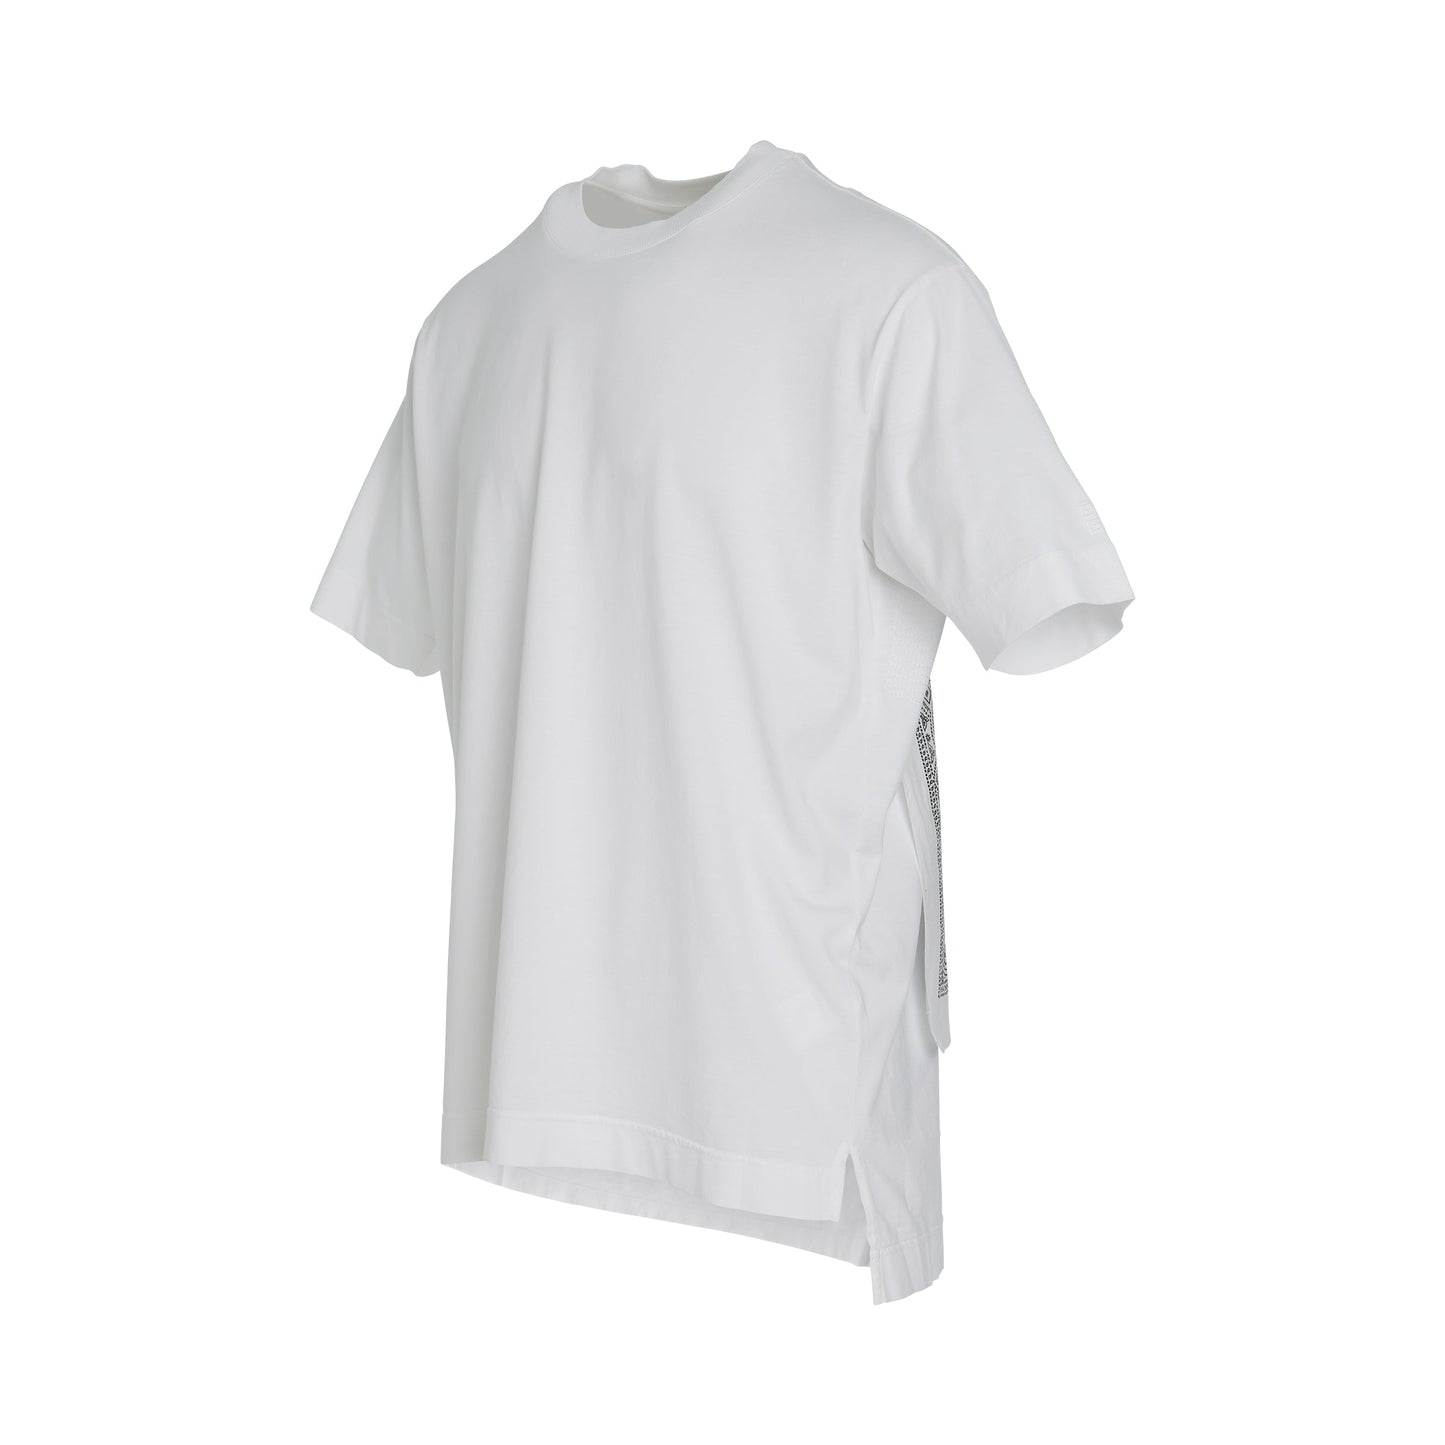 Embroidered Bandanas Washed T-Shirt in White